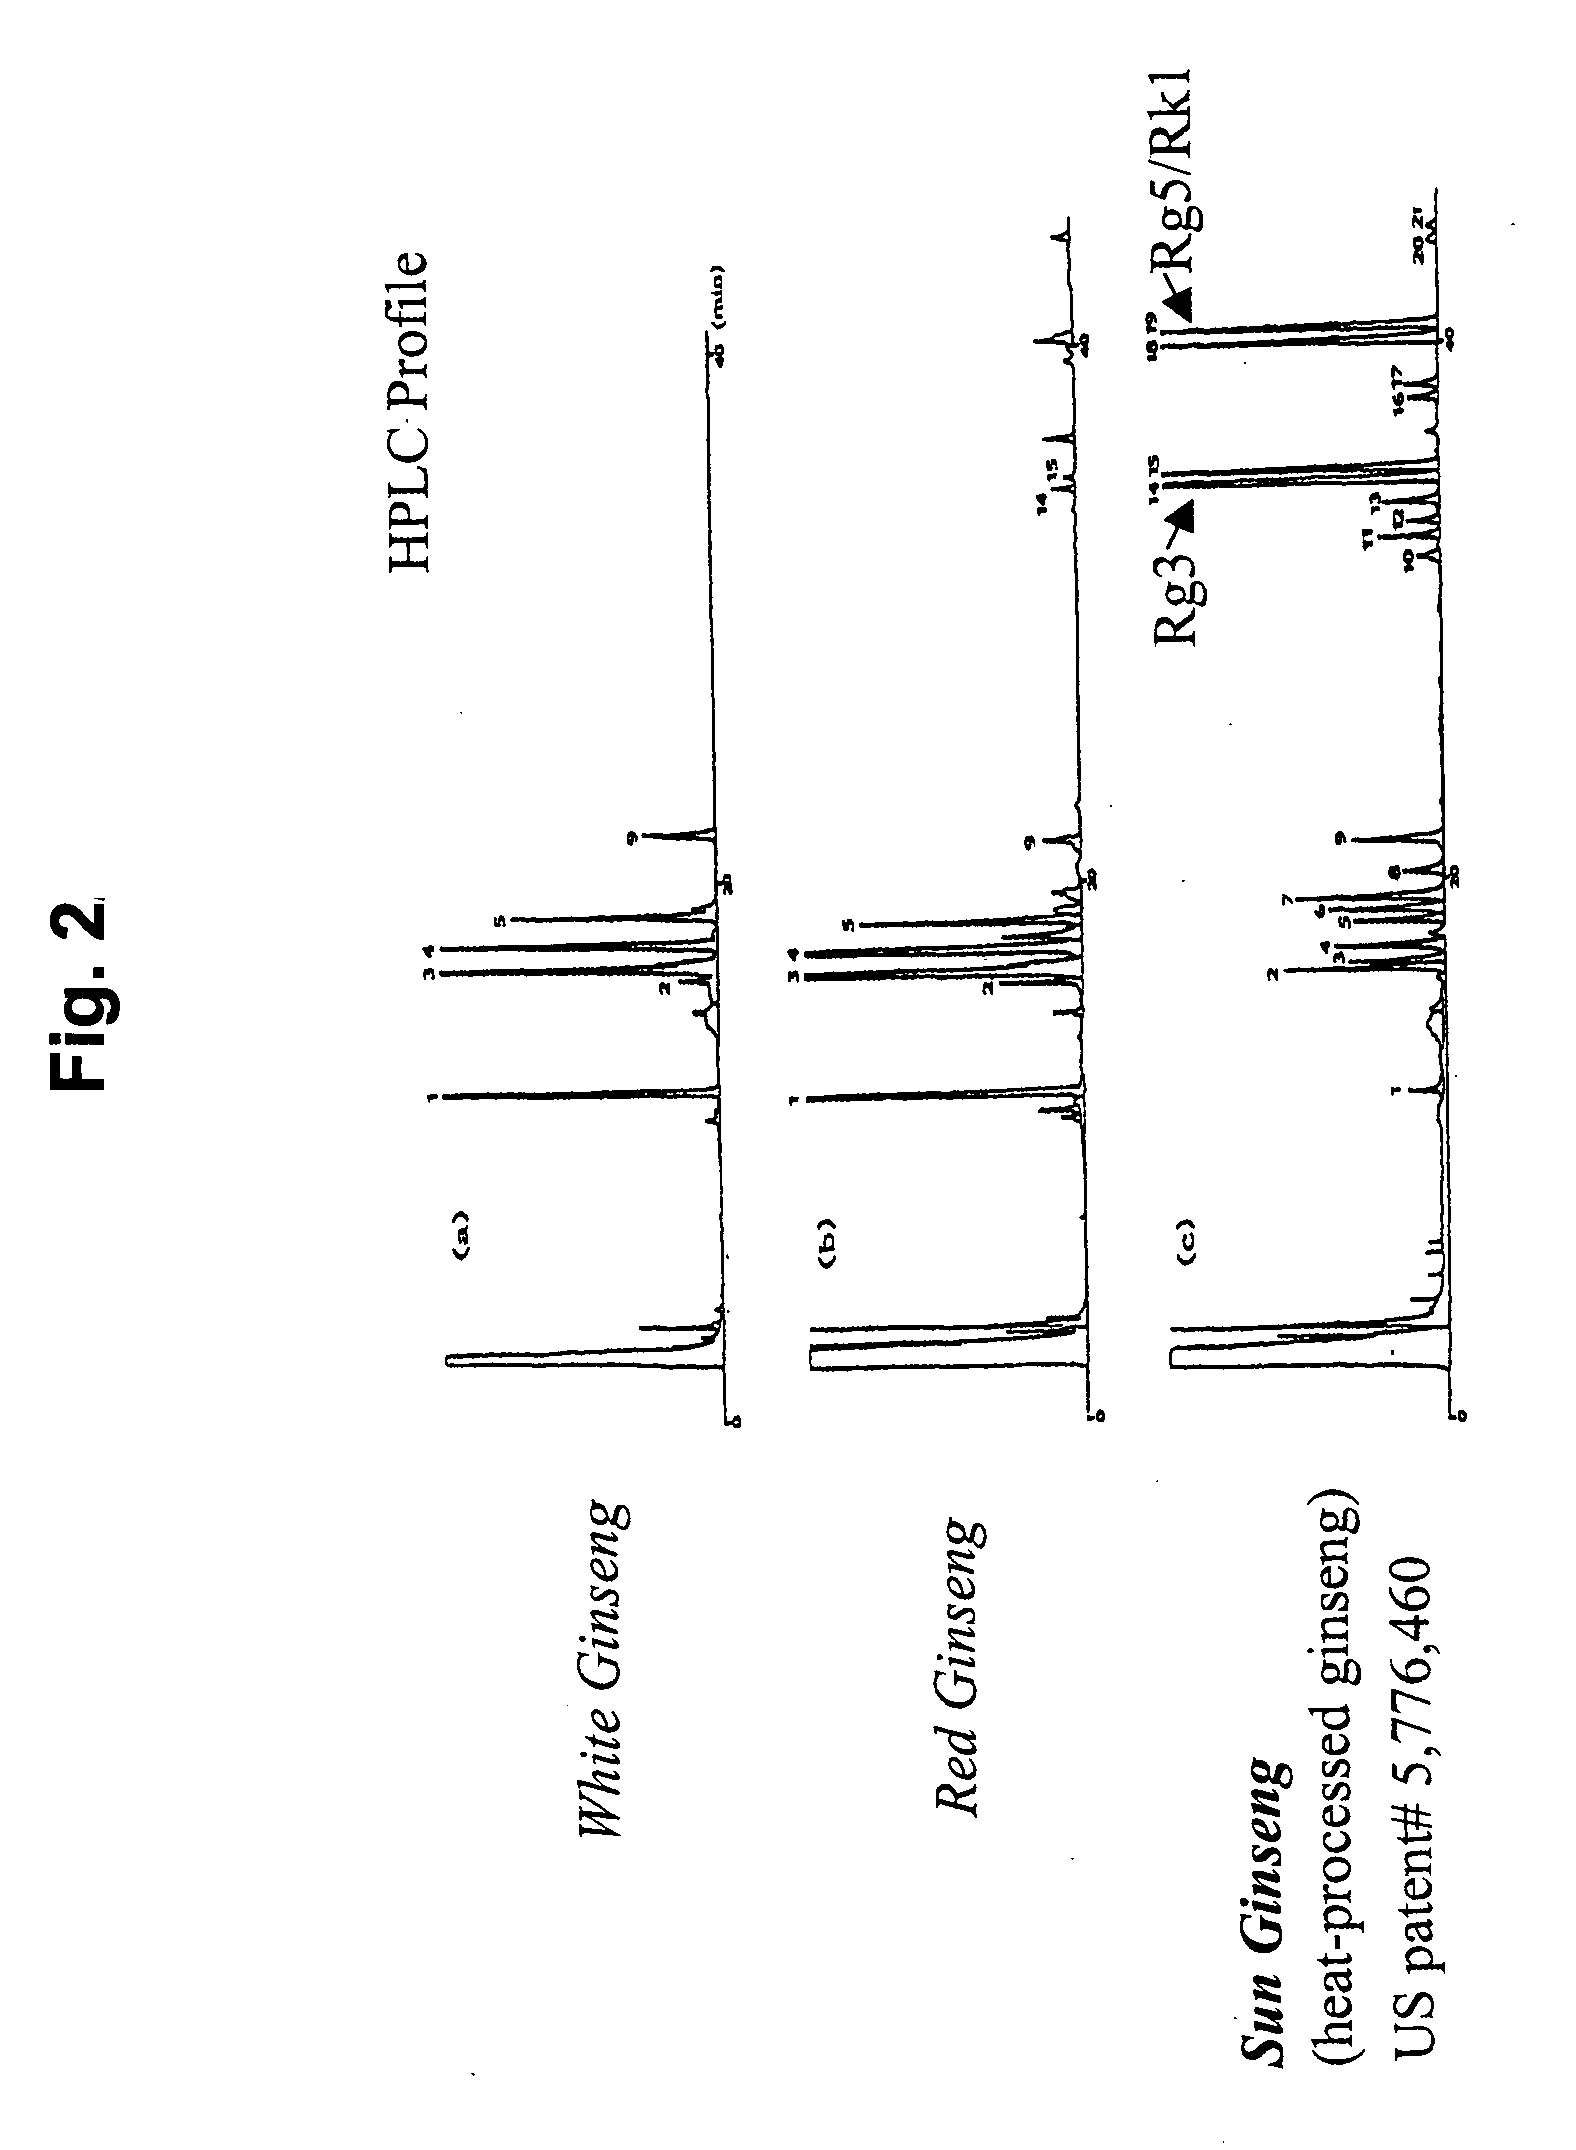 Compounds for treating Alzheimer's disease and for inhibiting beta-amyloid peptitde production